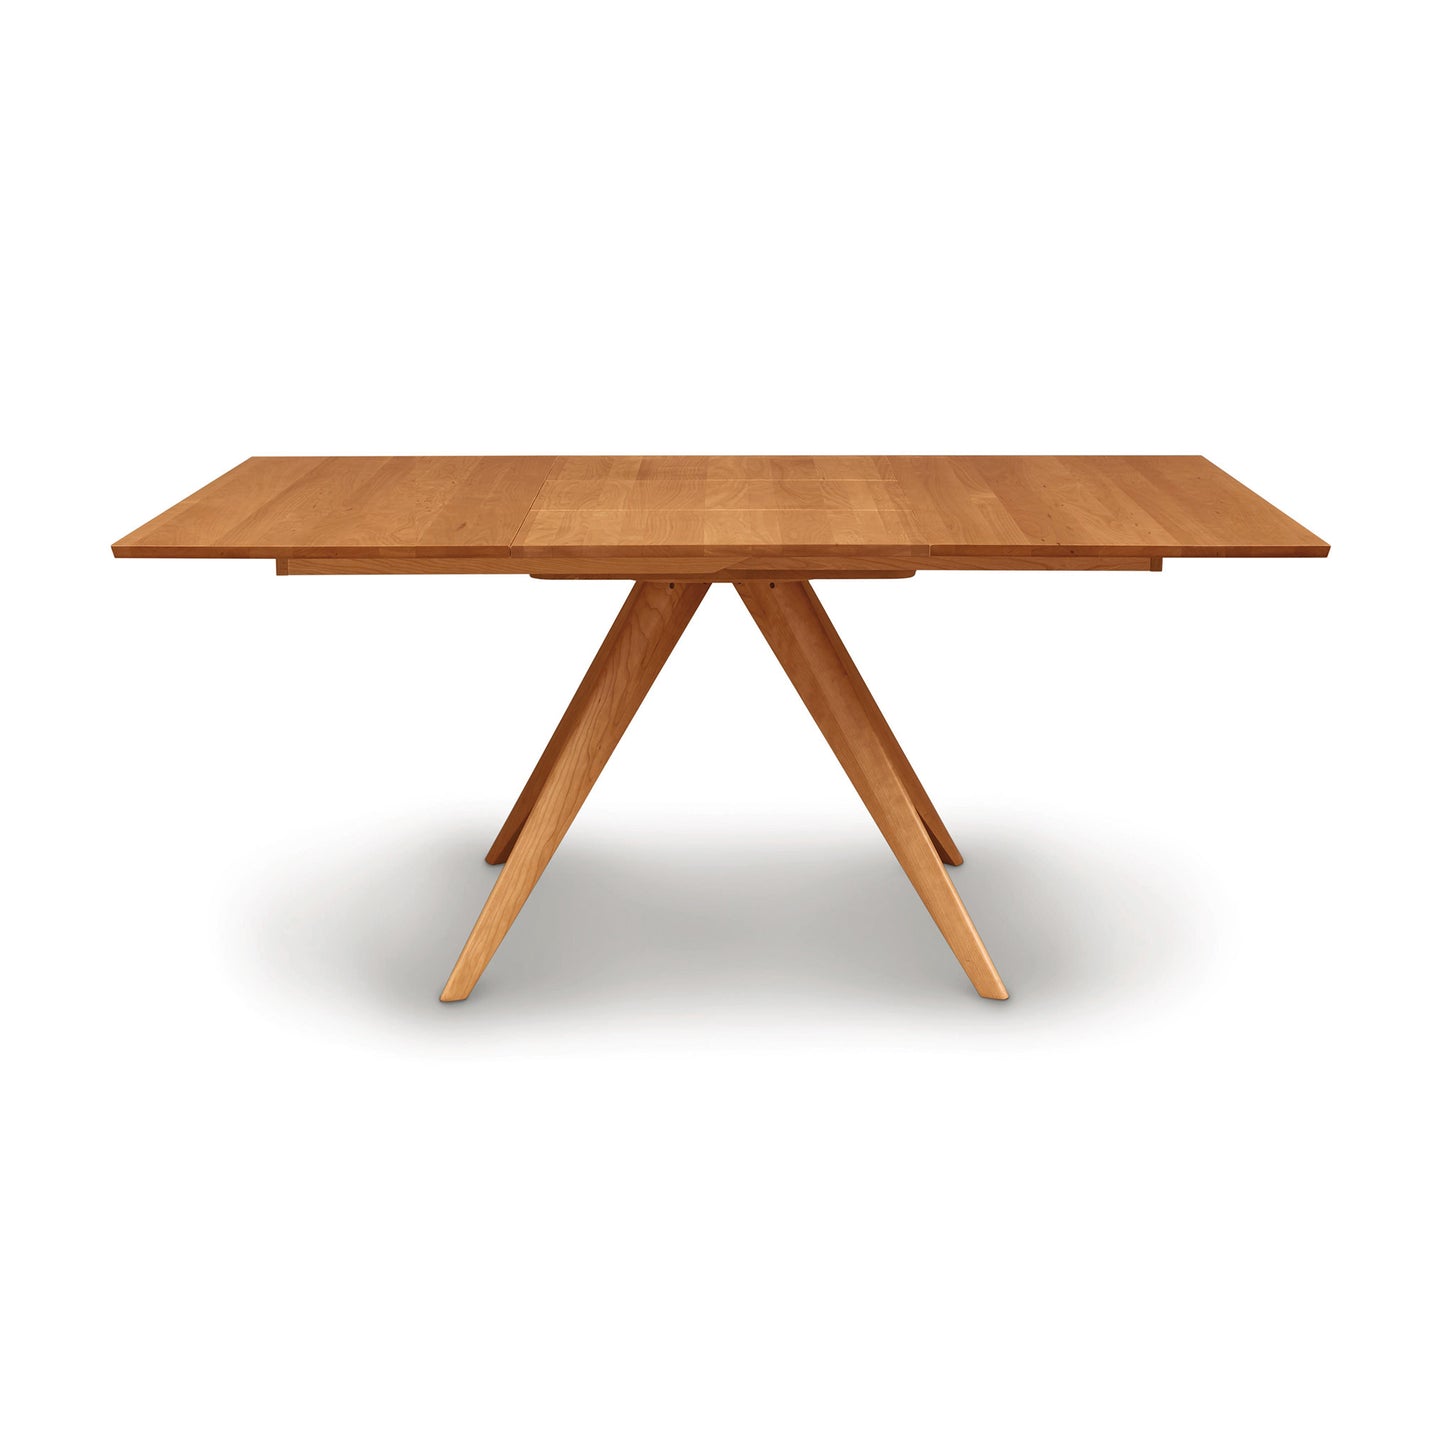 The Copeland Furniture Catalina Square Extension Dining Table showcases mid-century styling and is made from sustainably harvested wood. Expertly crafted with three legs, this wooden table adds a touch of elegance to any space and